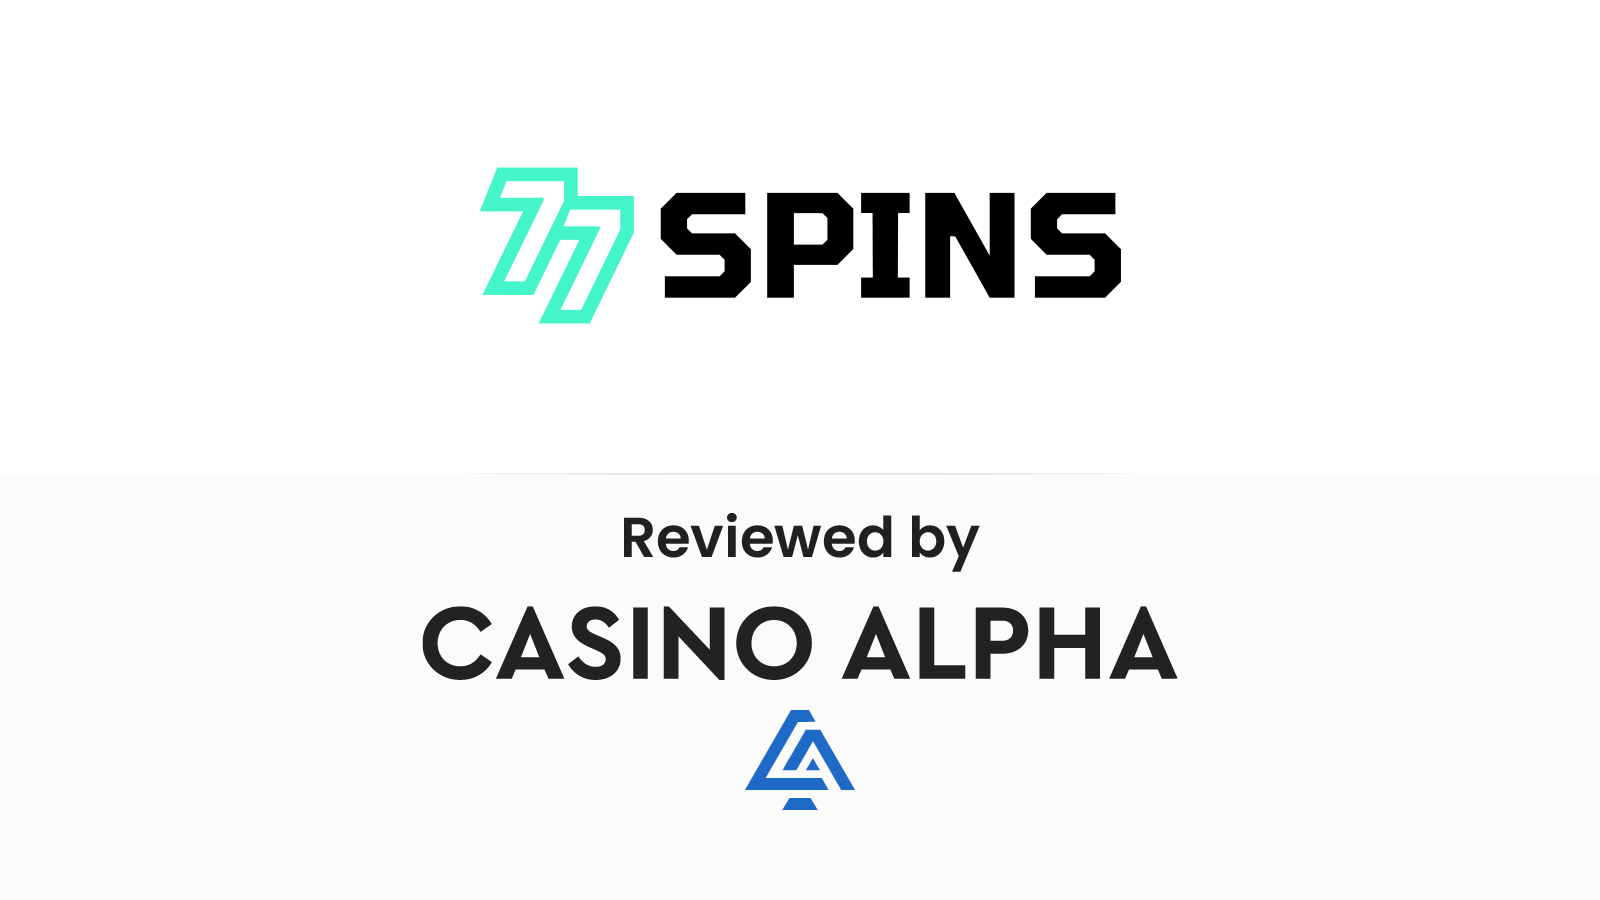 77Spins Casino Review & Newest Bonus Codes for 2023